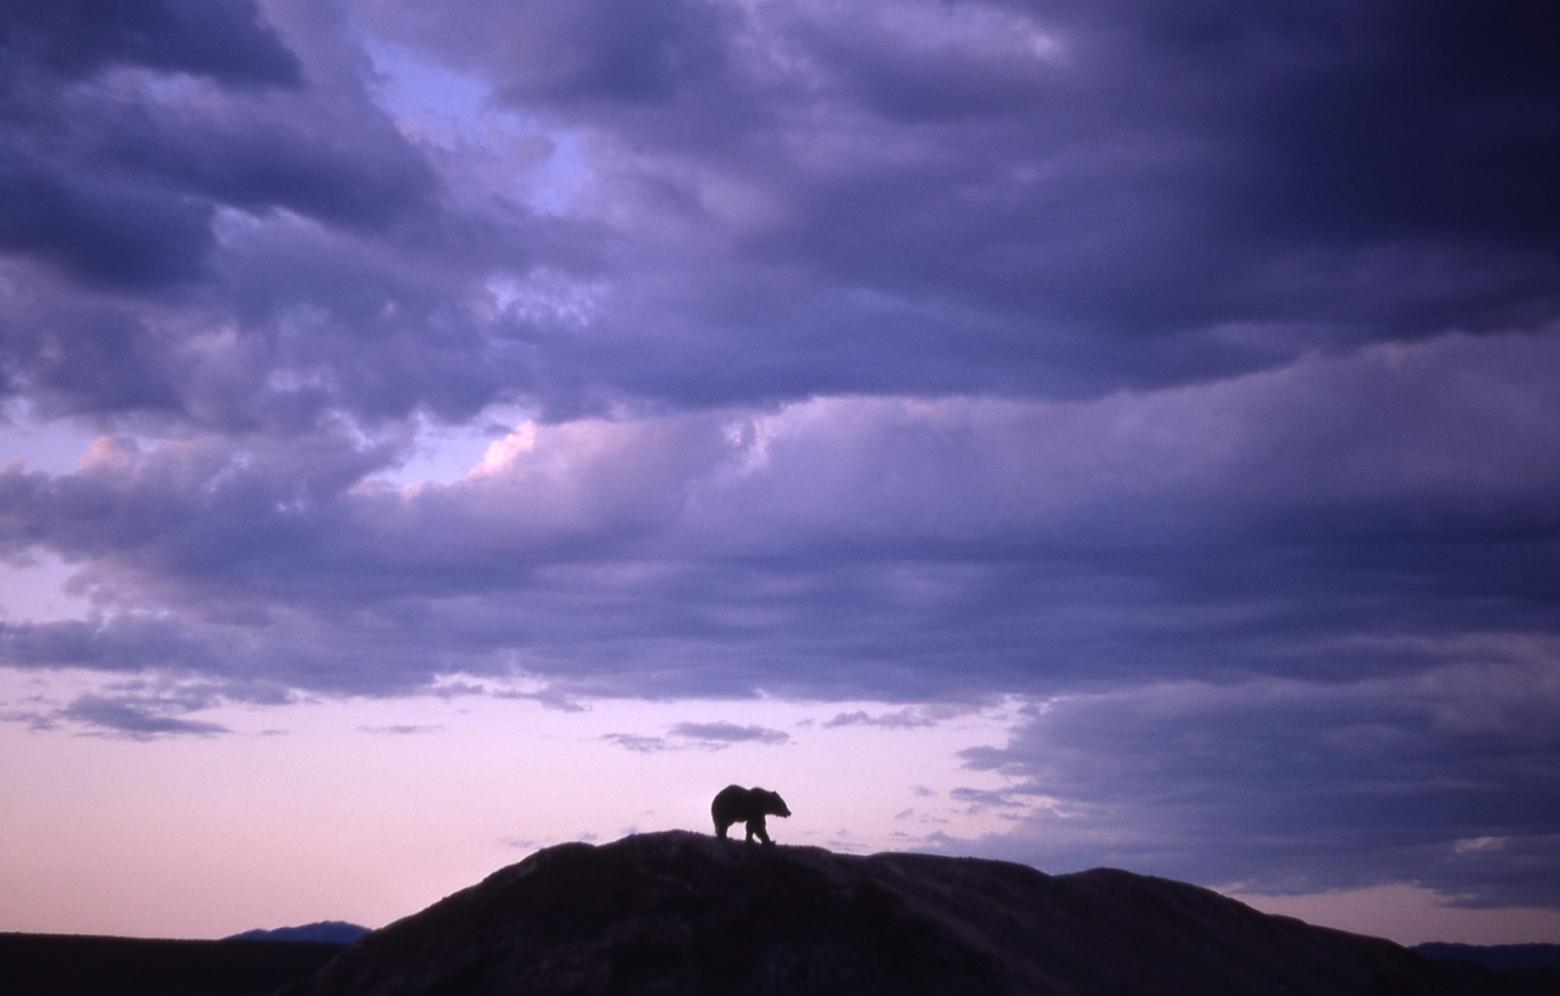 In the late 1960s when this photograph of a Yellowstone grizzly was taken, the bruin population was crashing, necessitating a desperate listing to give bears federal protection under the Endangered Species Act in 1975. The state of Wyoming then and still does regard grizzlies as a management burden.  Four decades ago fewer than 140 grizzlies survived in the entire Greater Yellowstone Ecosystem. While bear numbers have grown so too have the number of significant threats to the survival of grizzlies and large carnivores worldwide. 